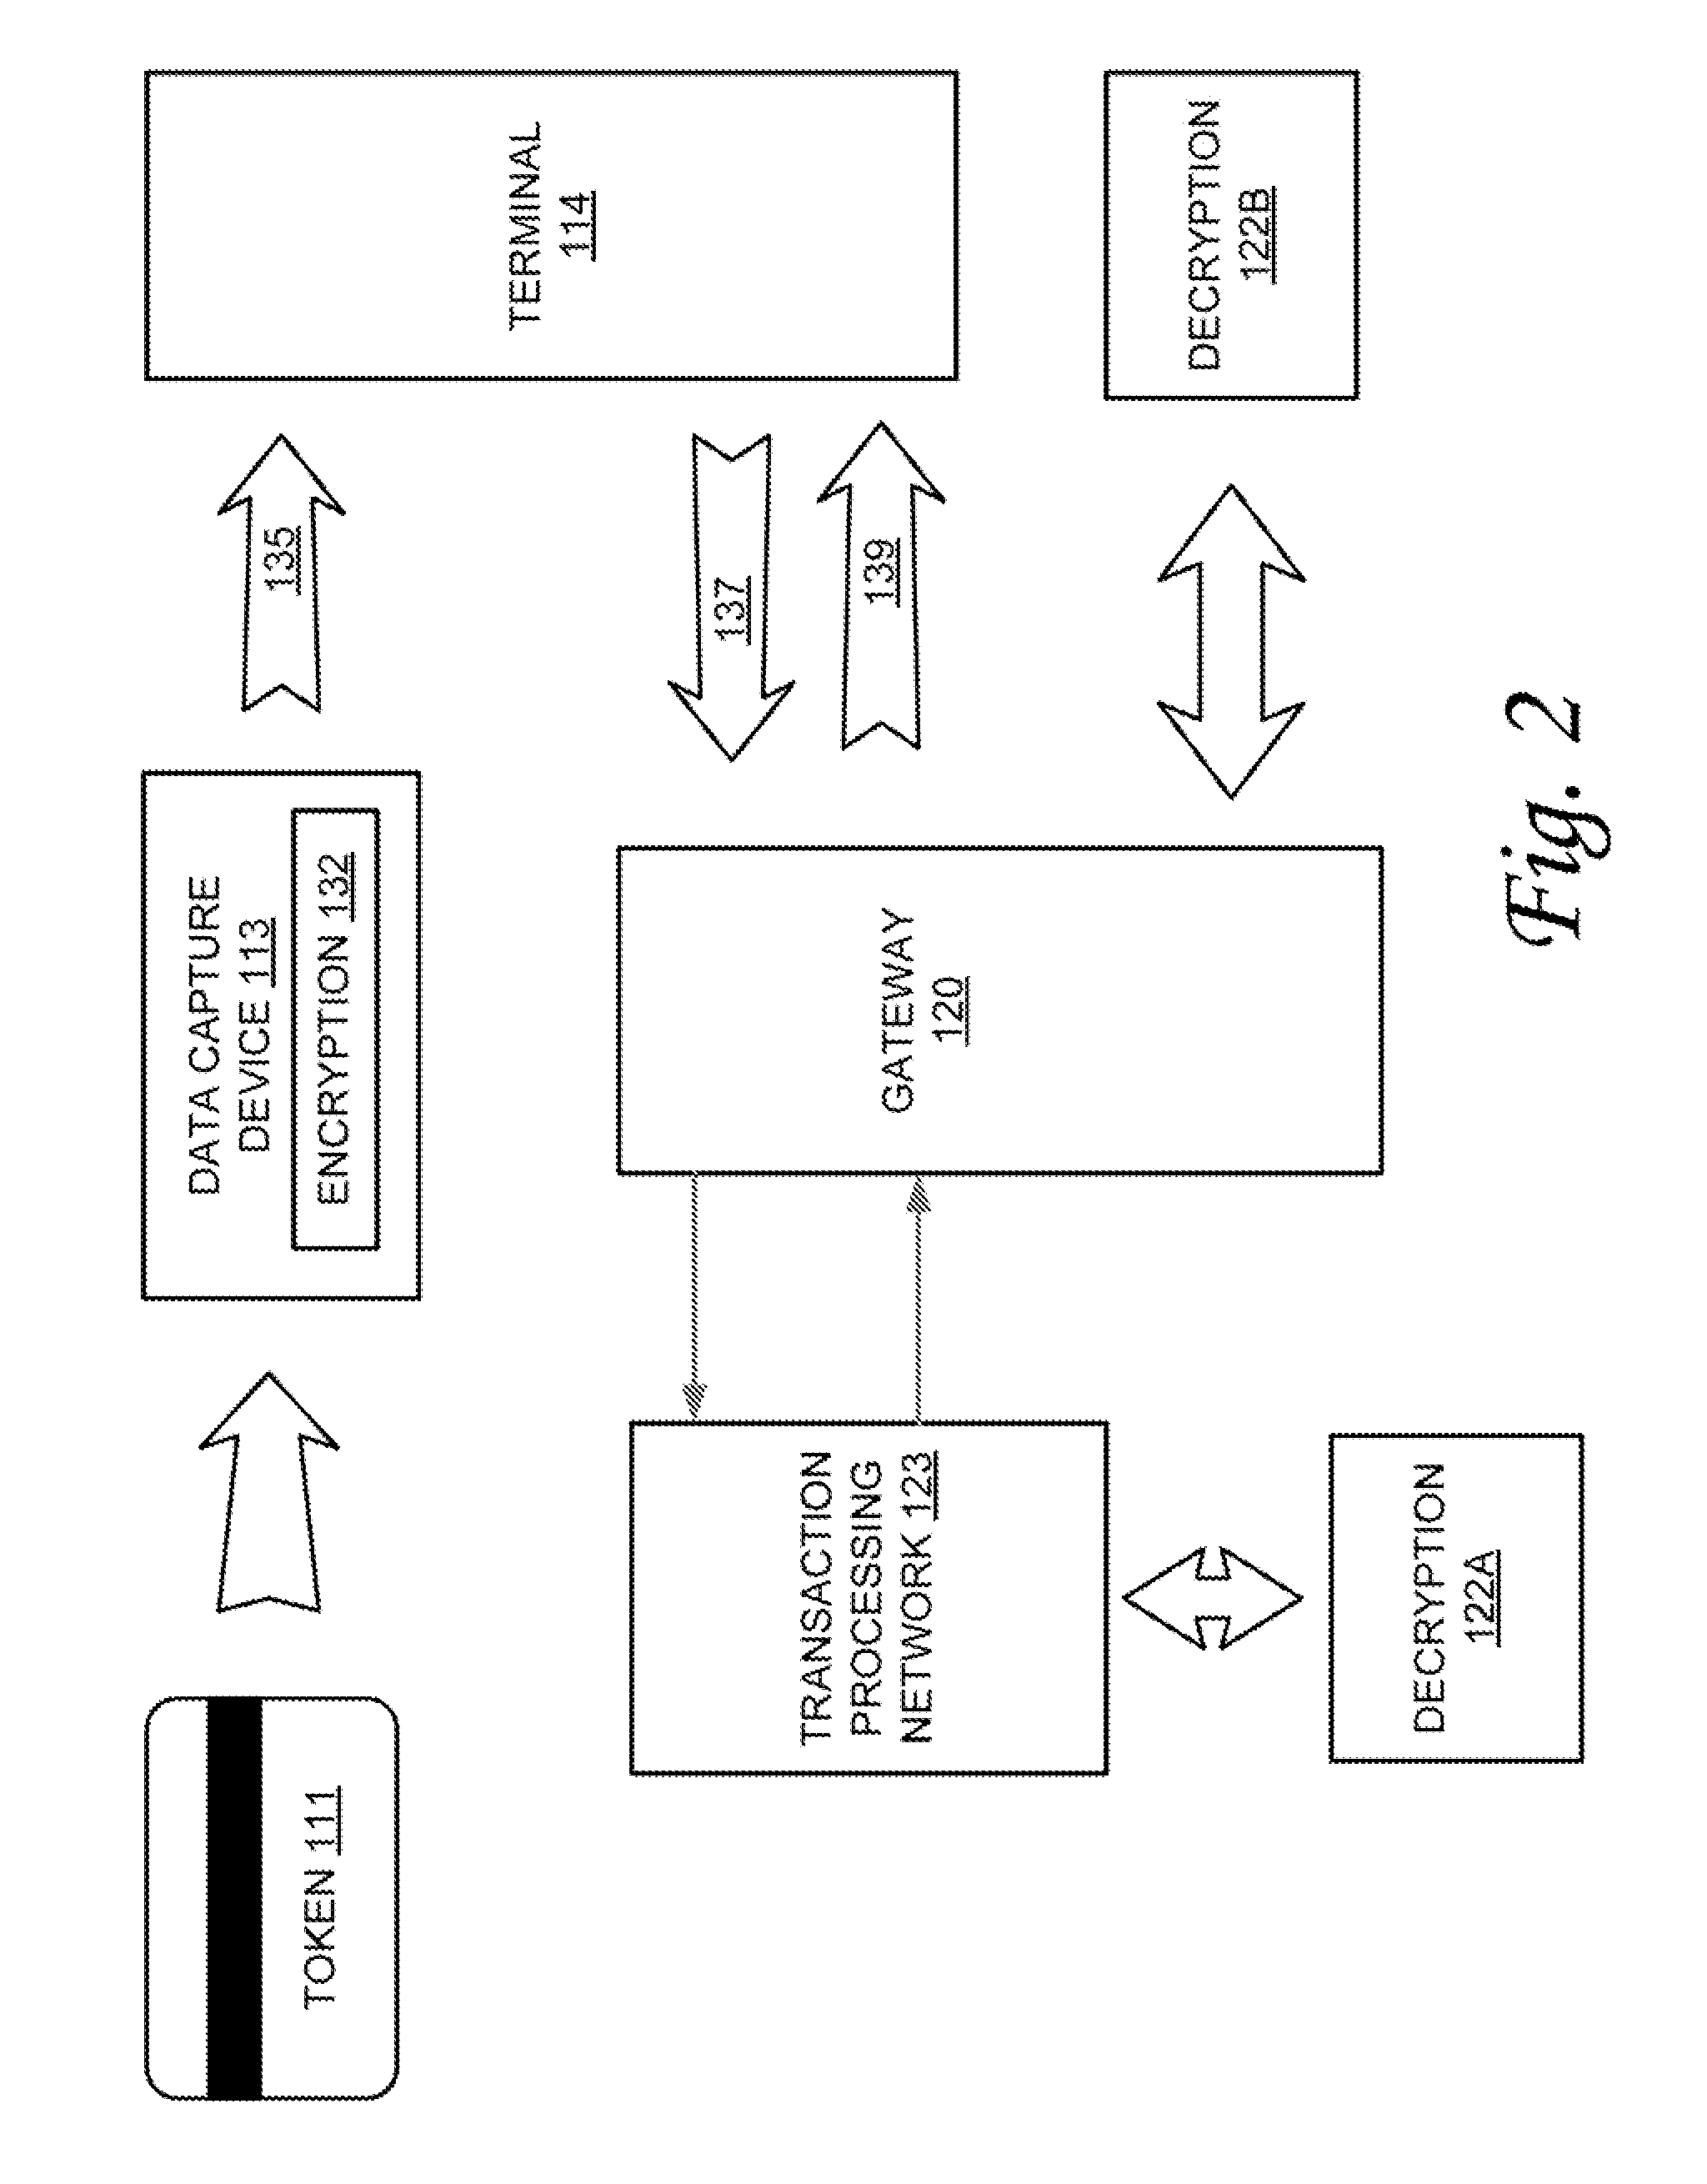 System and method for variable length encryption